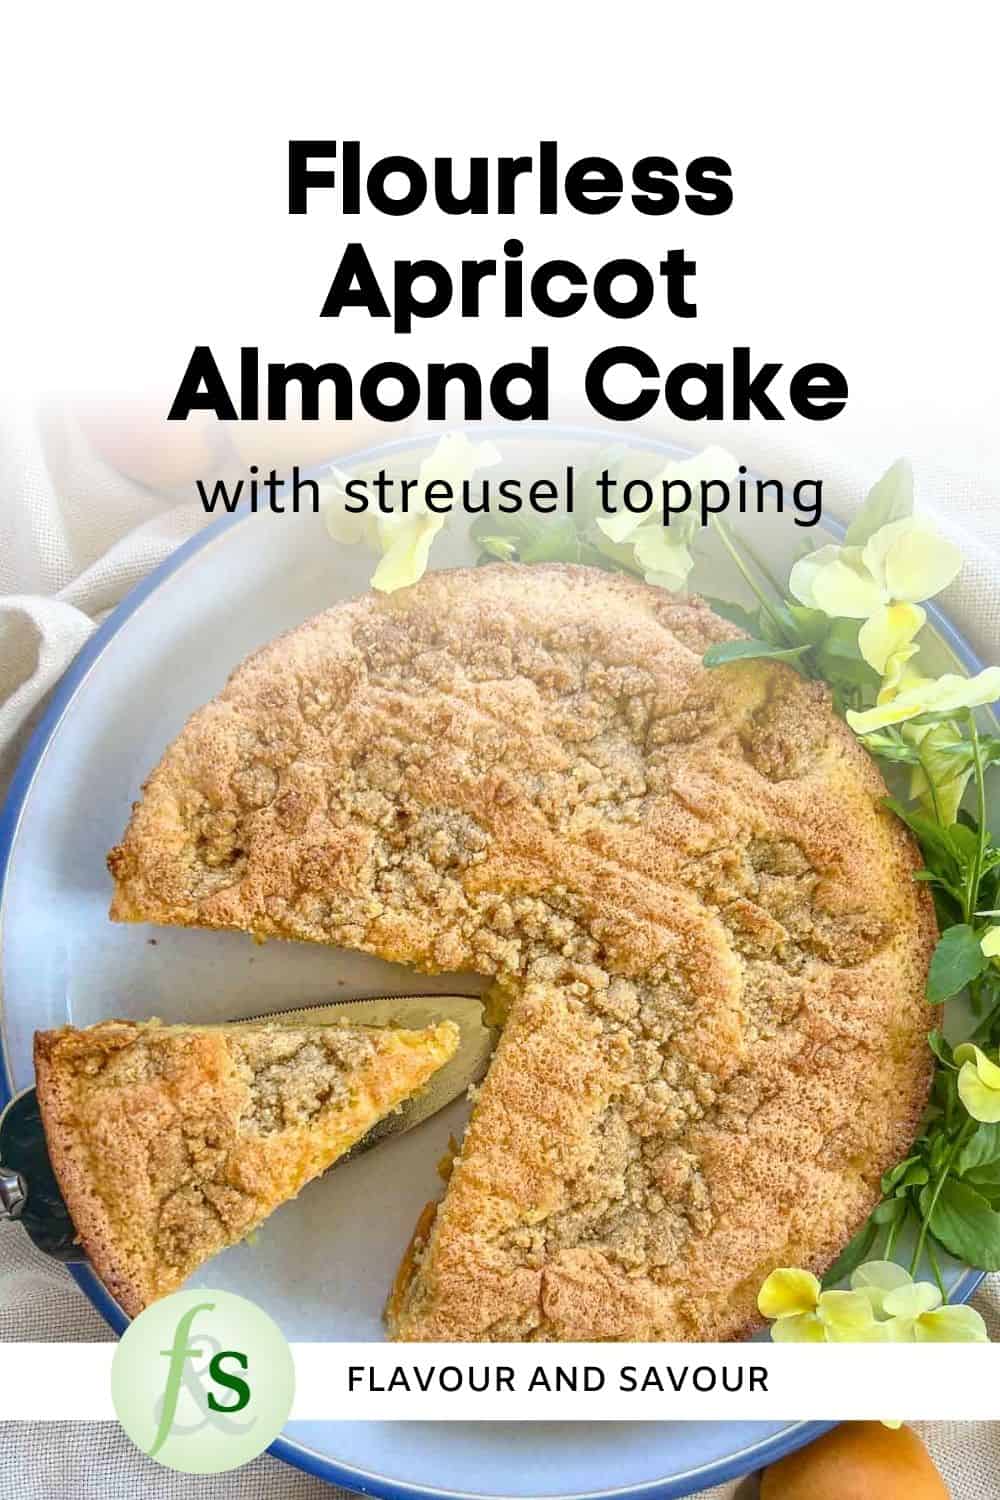 Image with text overlay for Flourless Apricot Almond Cake with Streusel Topping.